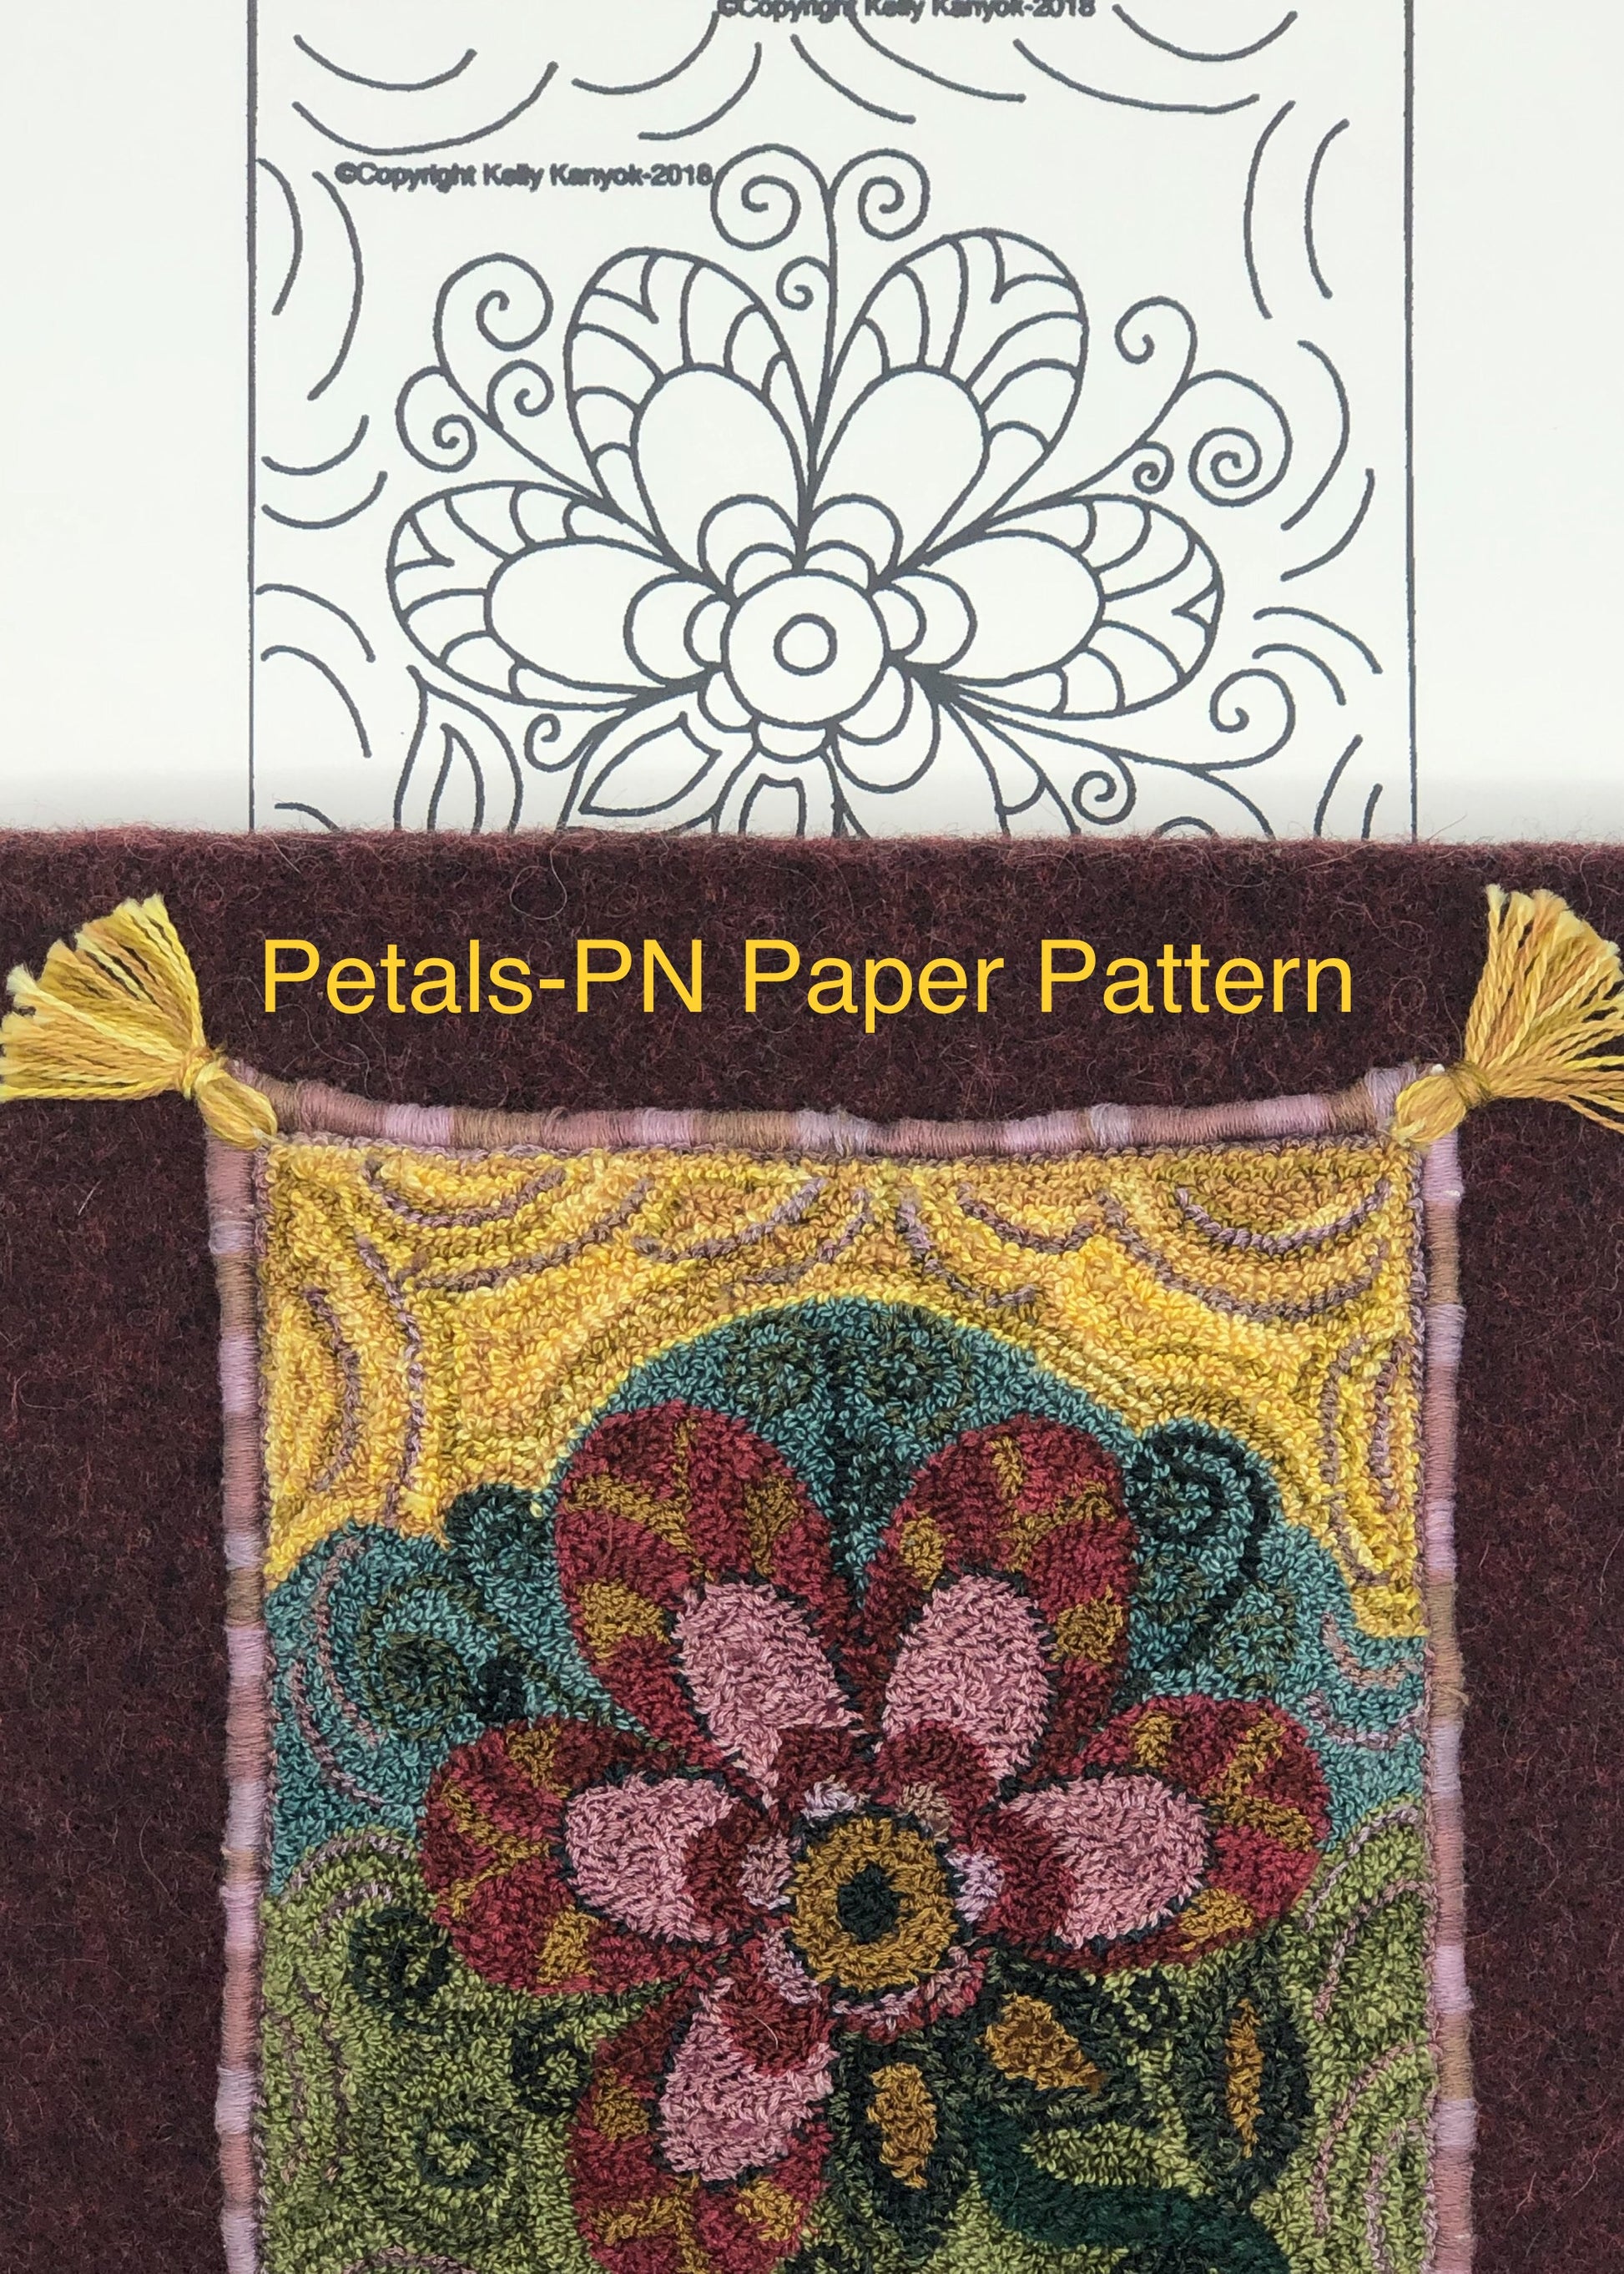 Petals- Punch Needle Pattern by Orphaned Wool is available in two different formats, a Paper Pattern or Pattern on Weavers Cloth Fabric. Both pattern types include punch instructions and the color guide with both Valdani Threads and DMC Floss color codes, so you can choose the type of thread to create this sweet floral design.